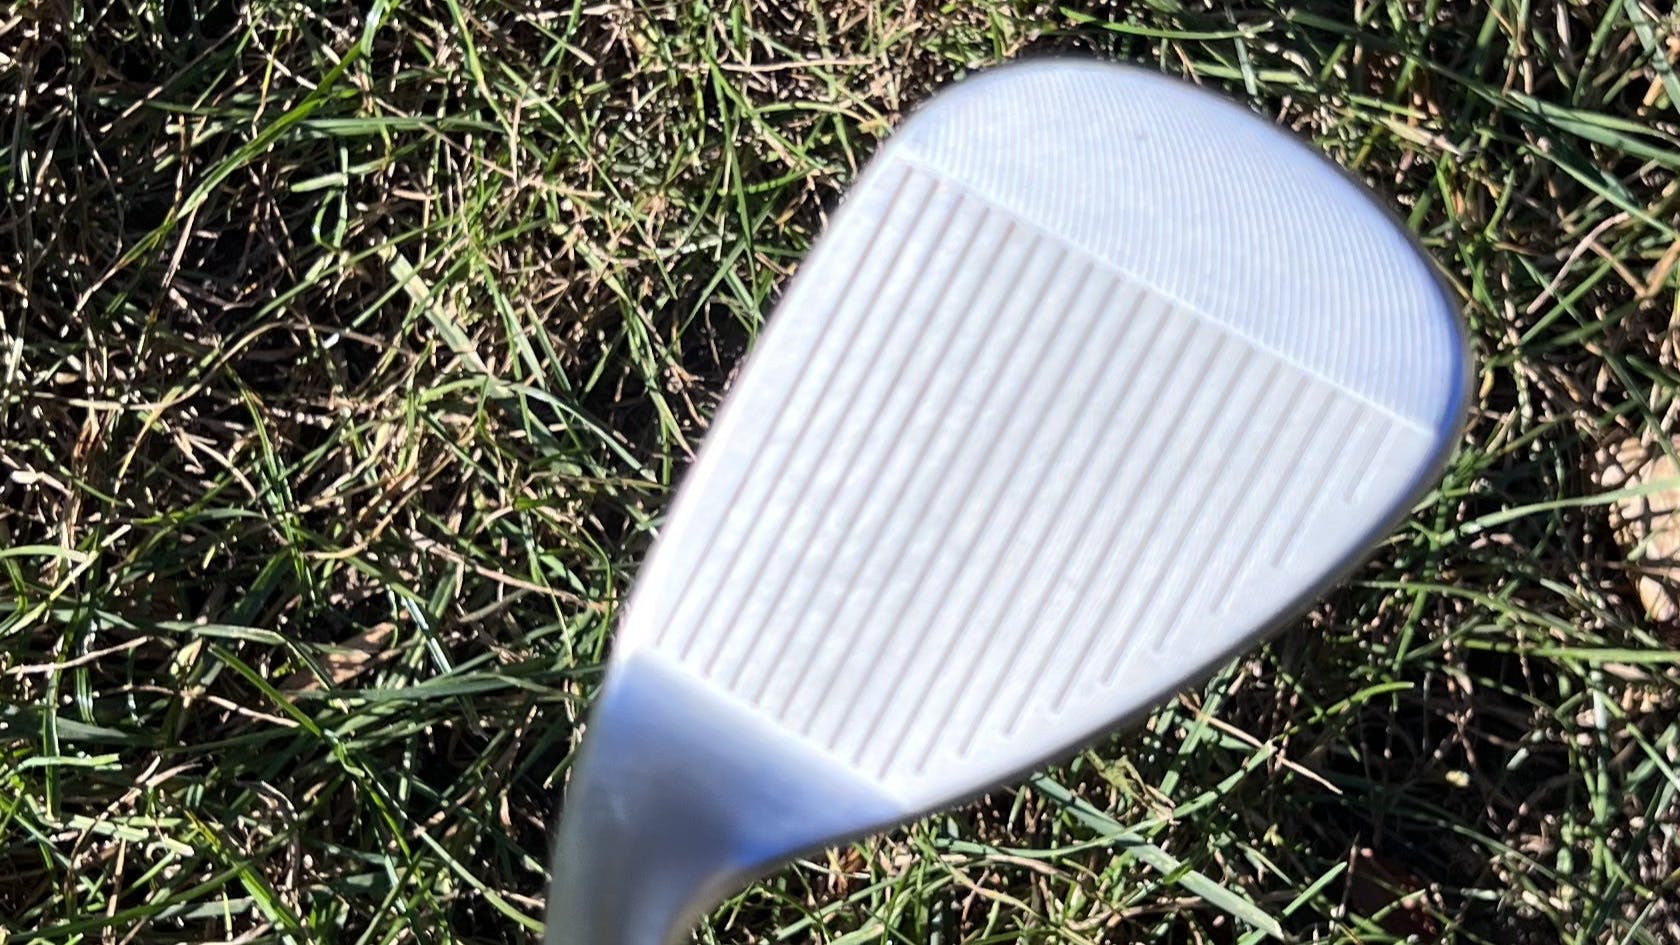 Face of the Cleveland Women's CBX Zipcore Wedge.